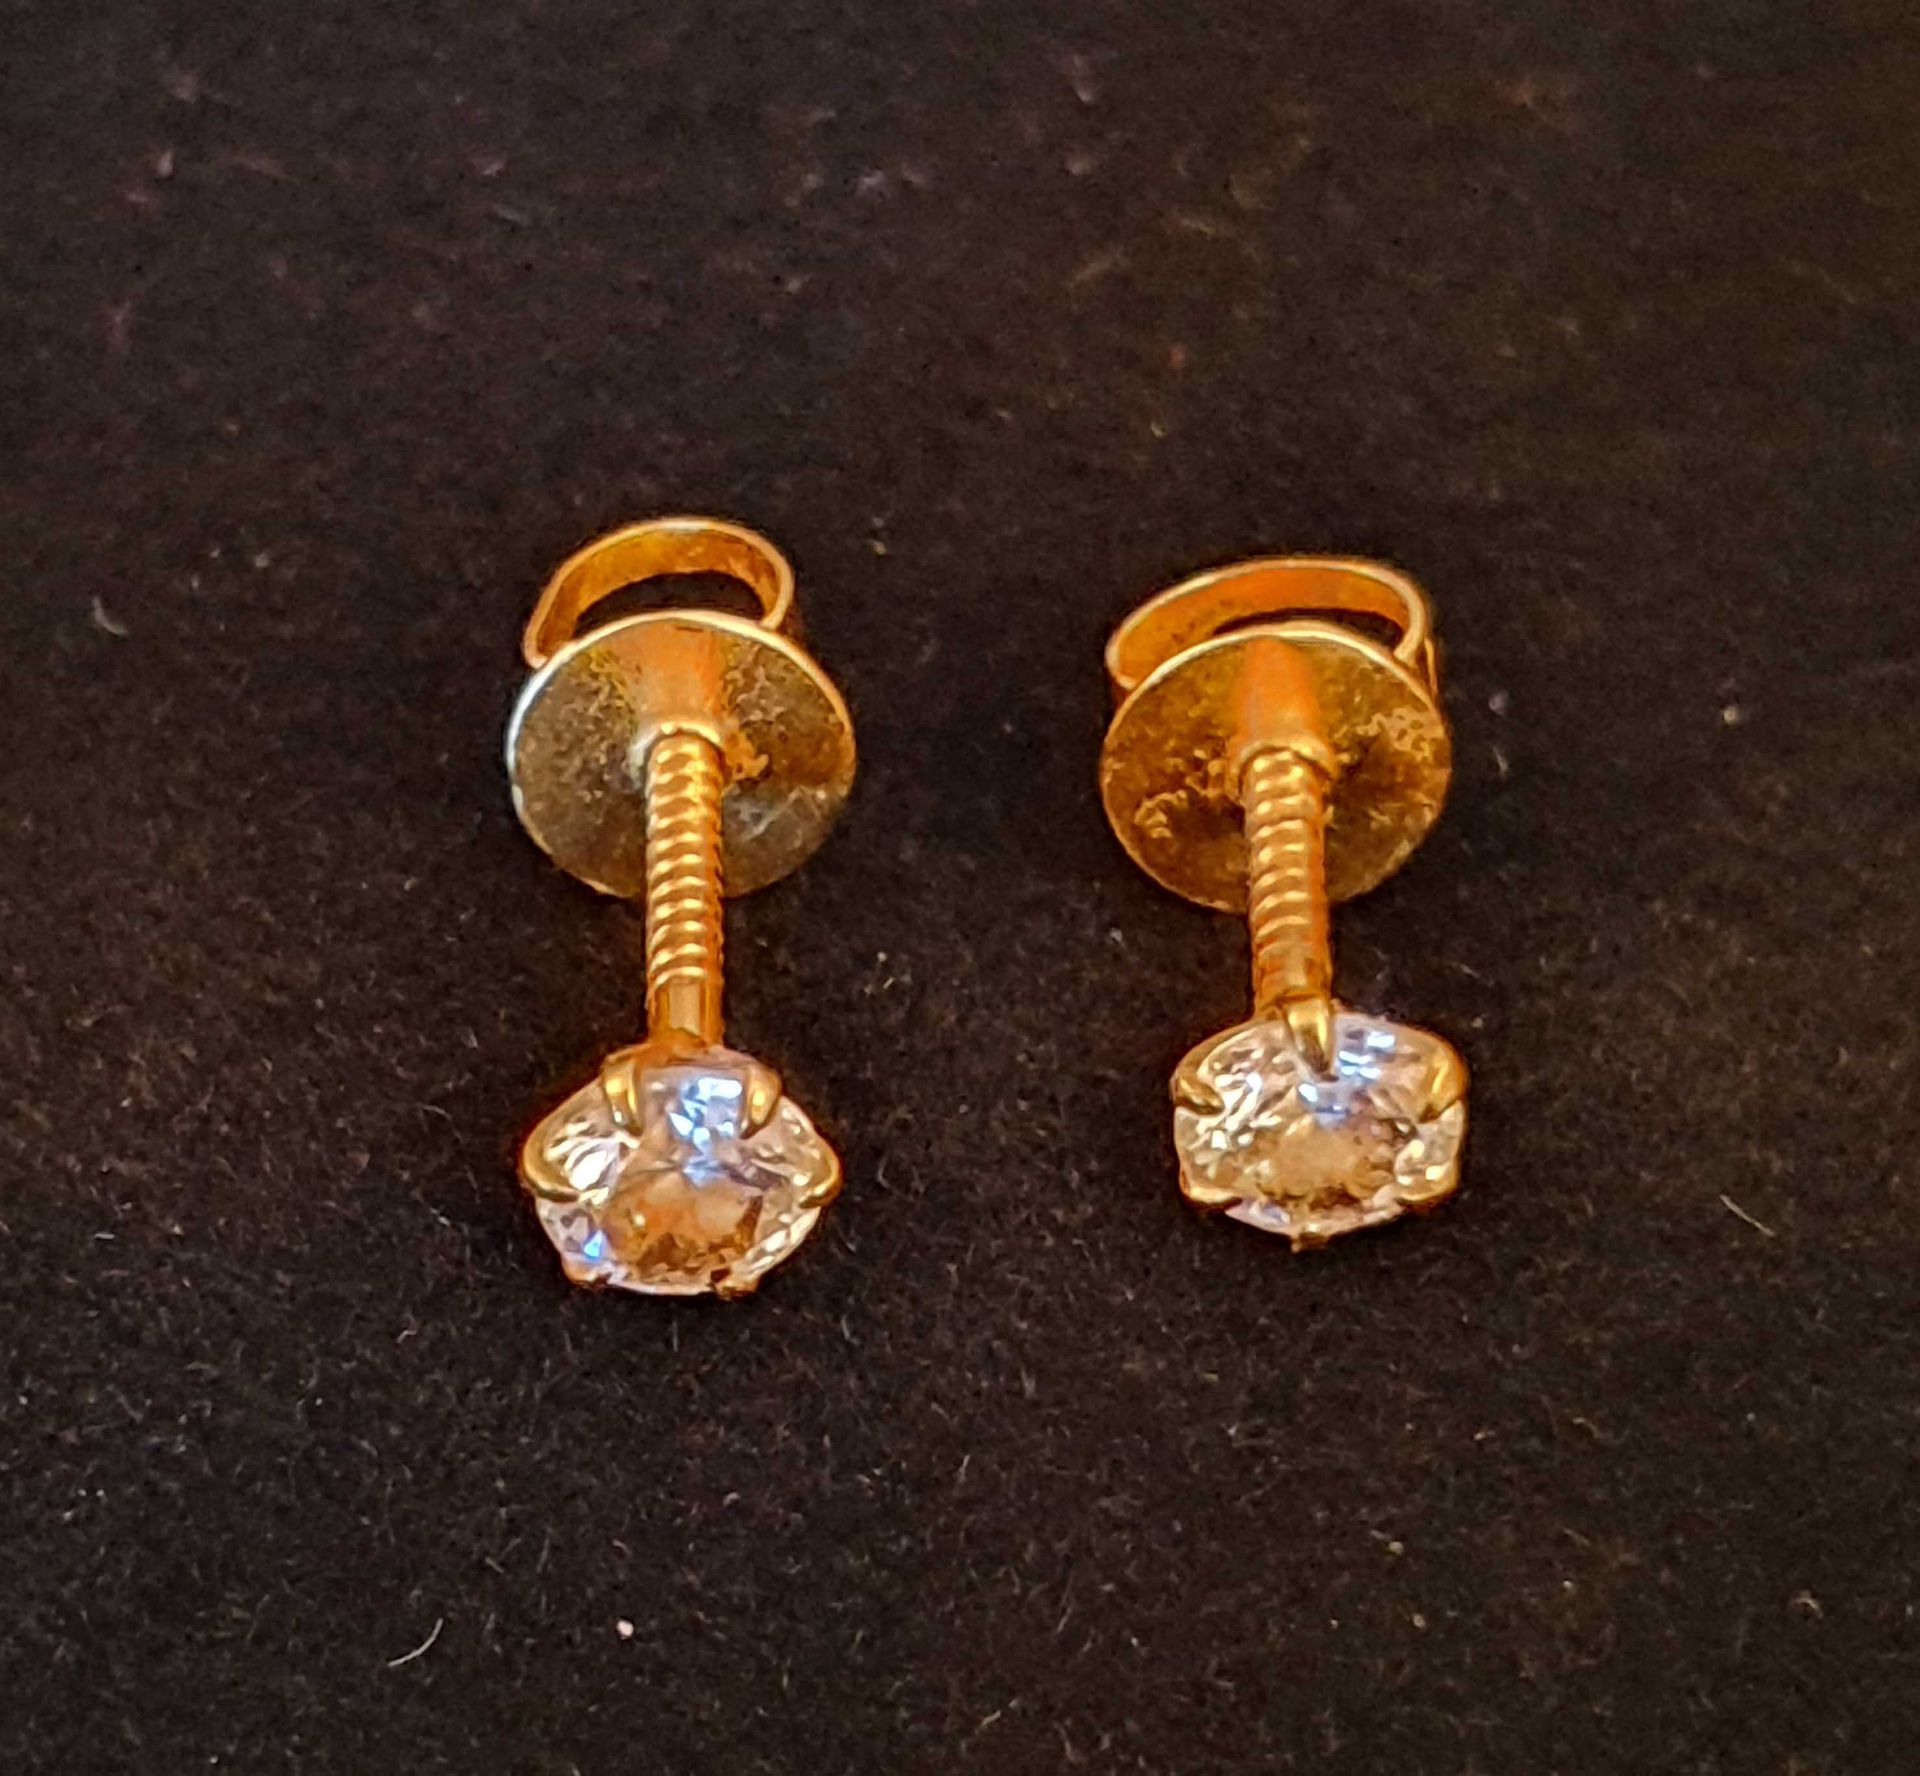 Pair of Clear Stone Stud Earrings with Gold Metal Mounts, 0.580 grams and A Pair of Clear Stone Stud - Image 4 of 4